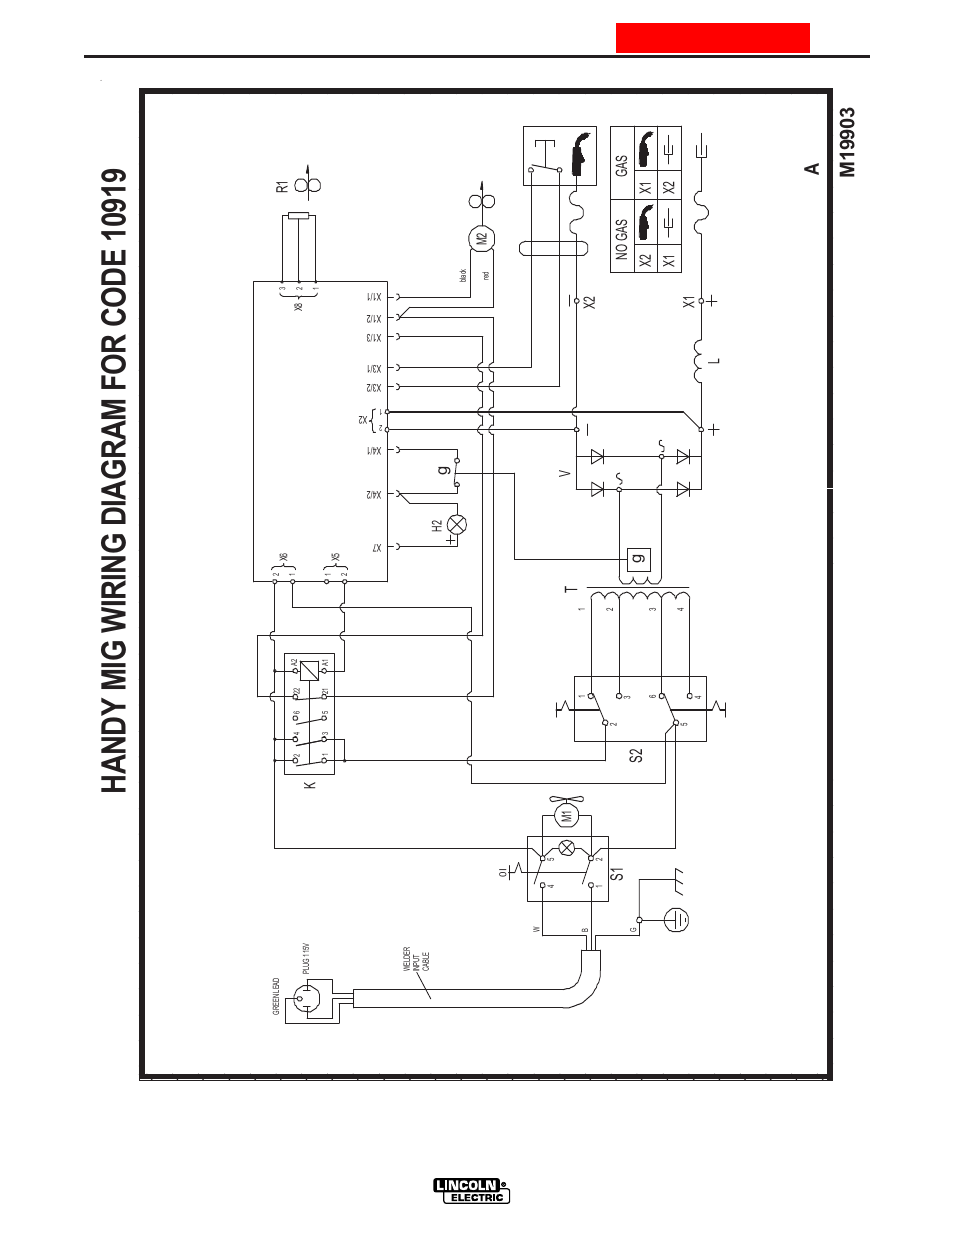 Lincoln Electric Wiring Diagram